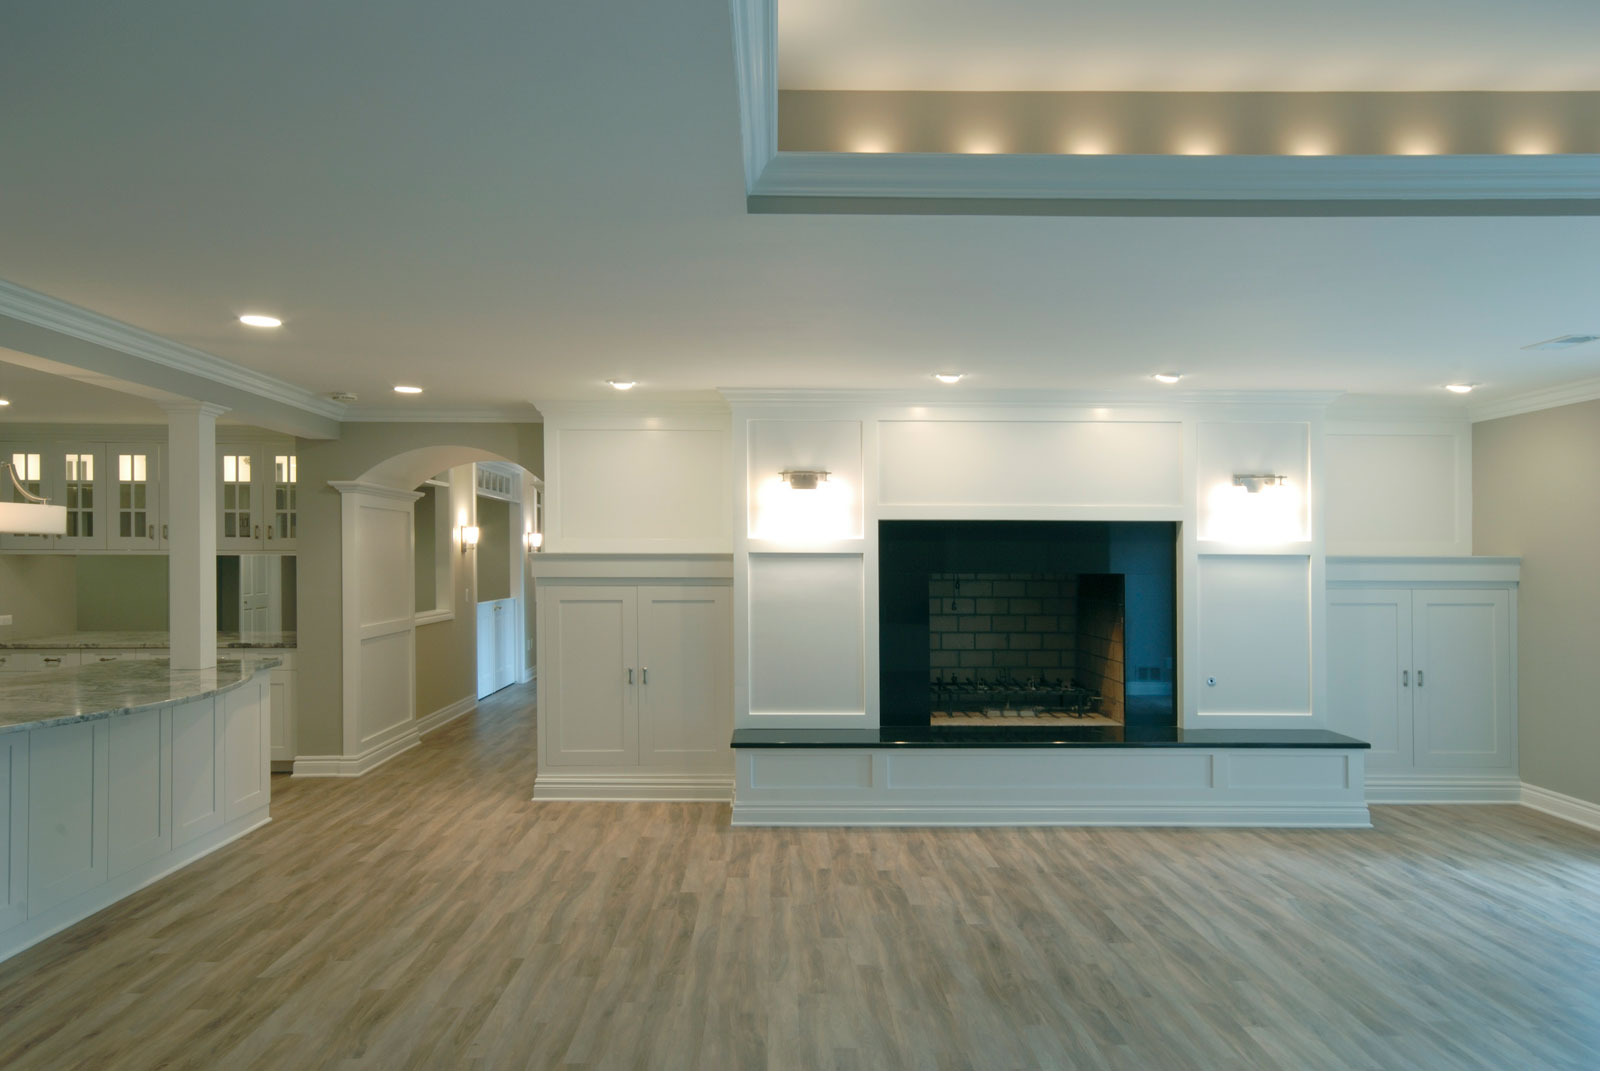 Basement Finishing Wooden Awesome Modern Basement Finishing Ideas Using Wooden Flooring And White Wall Color Combined With Simple Lighting For Inspiration Basement Basement Finishing Ideas Leading To Stunning Results